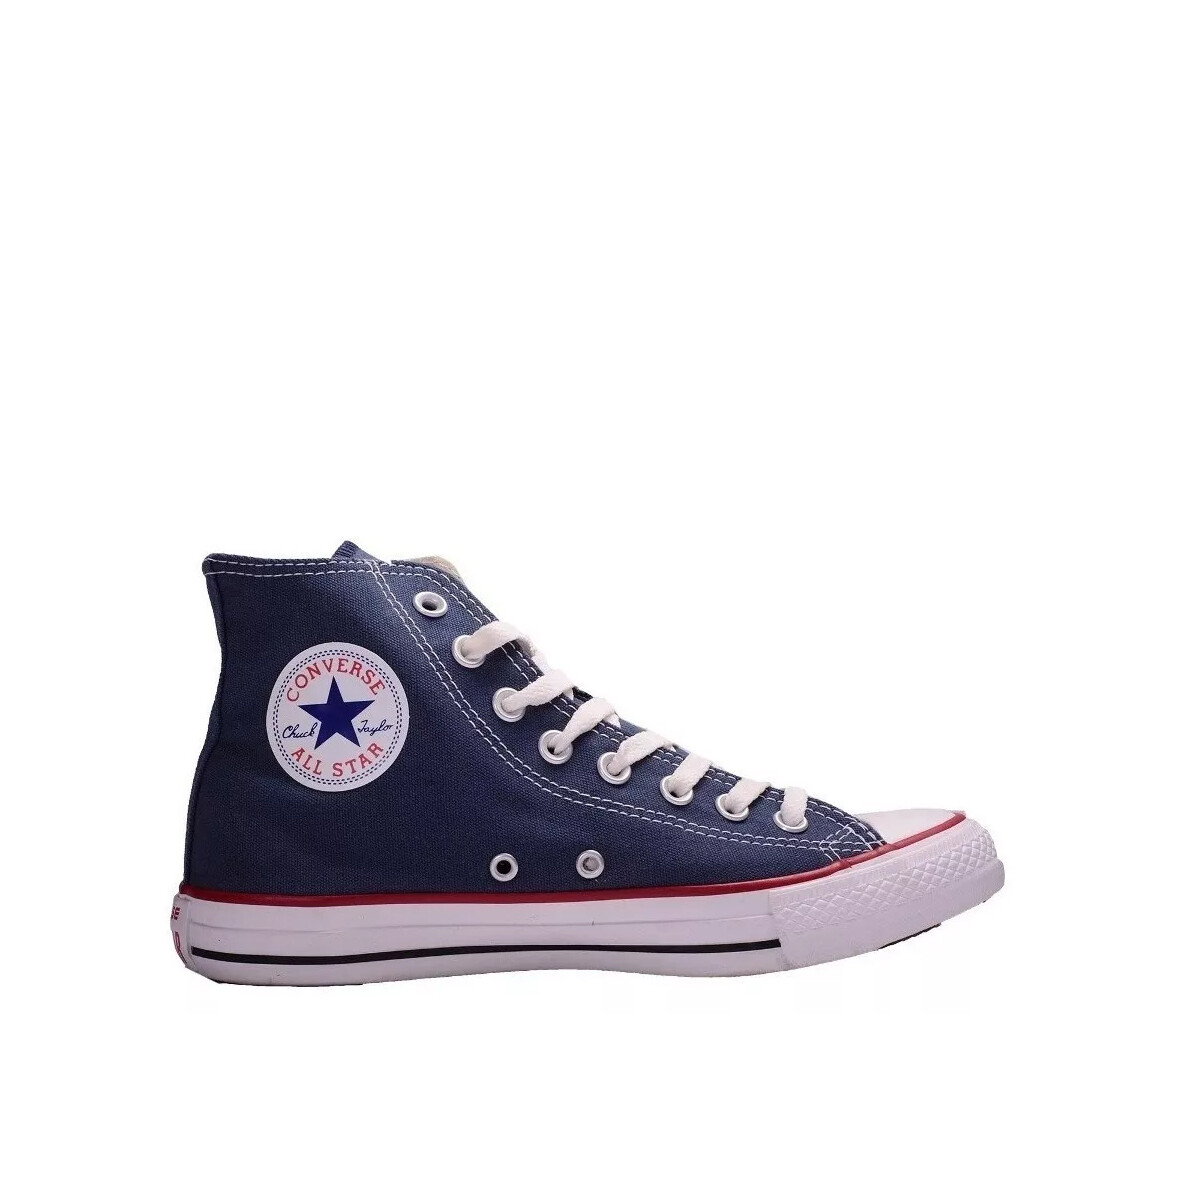 Championes Converse All Star 135980B - NAVY/RED 